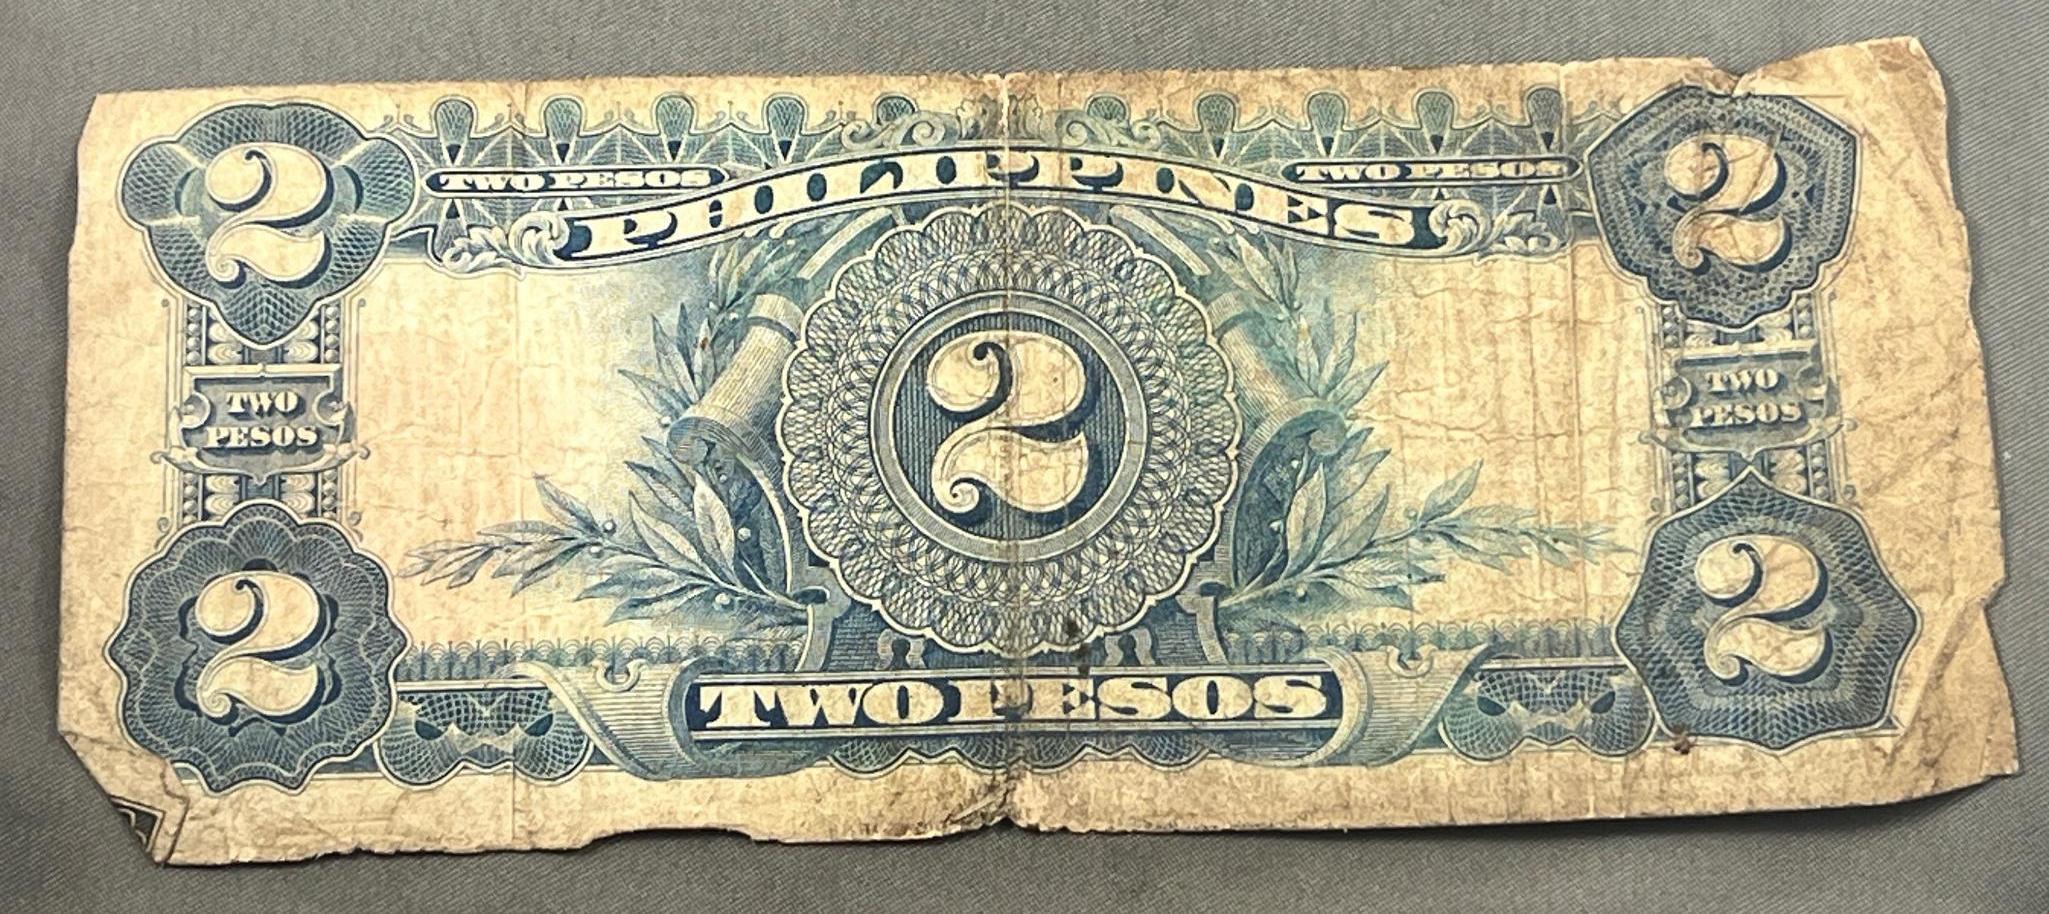 1936 Philippines Two Pesos Bank Note